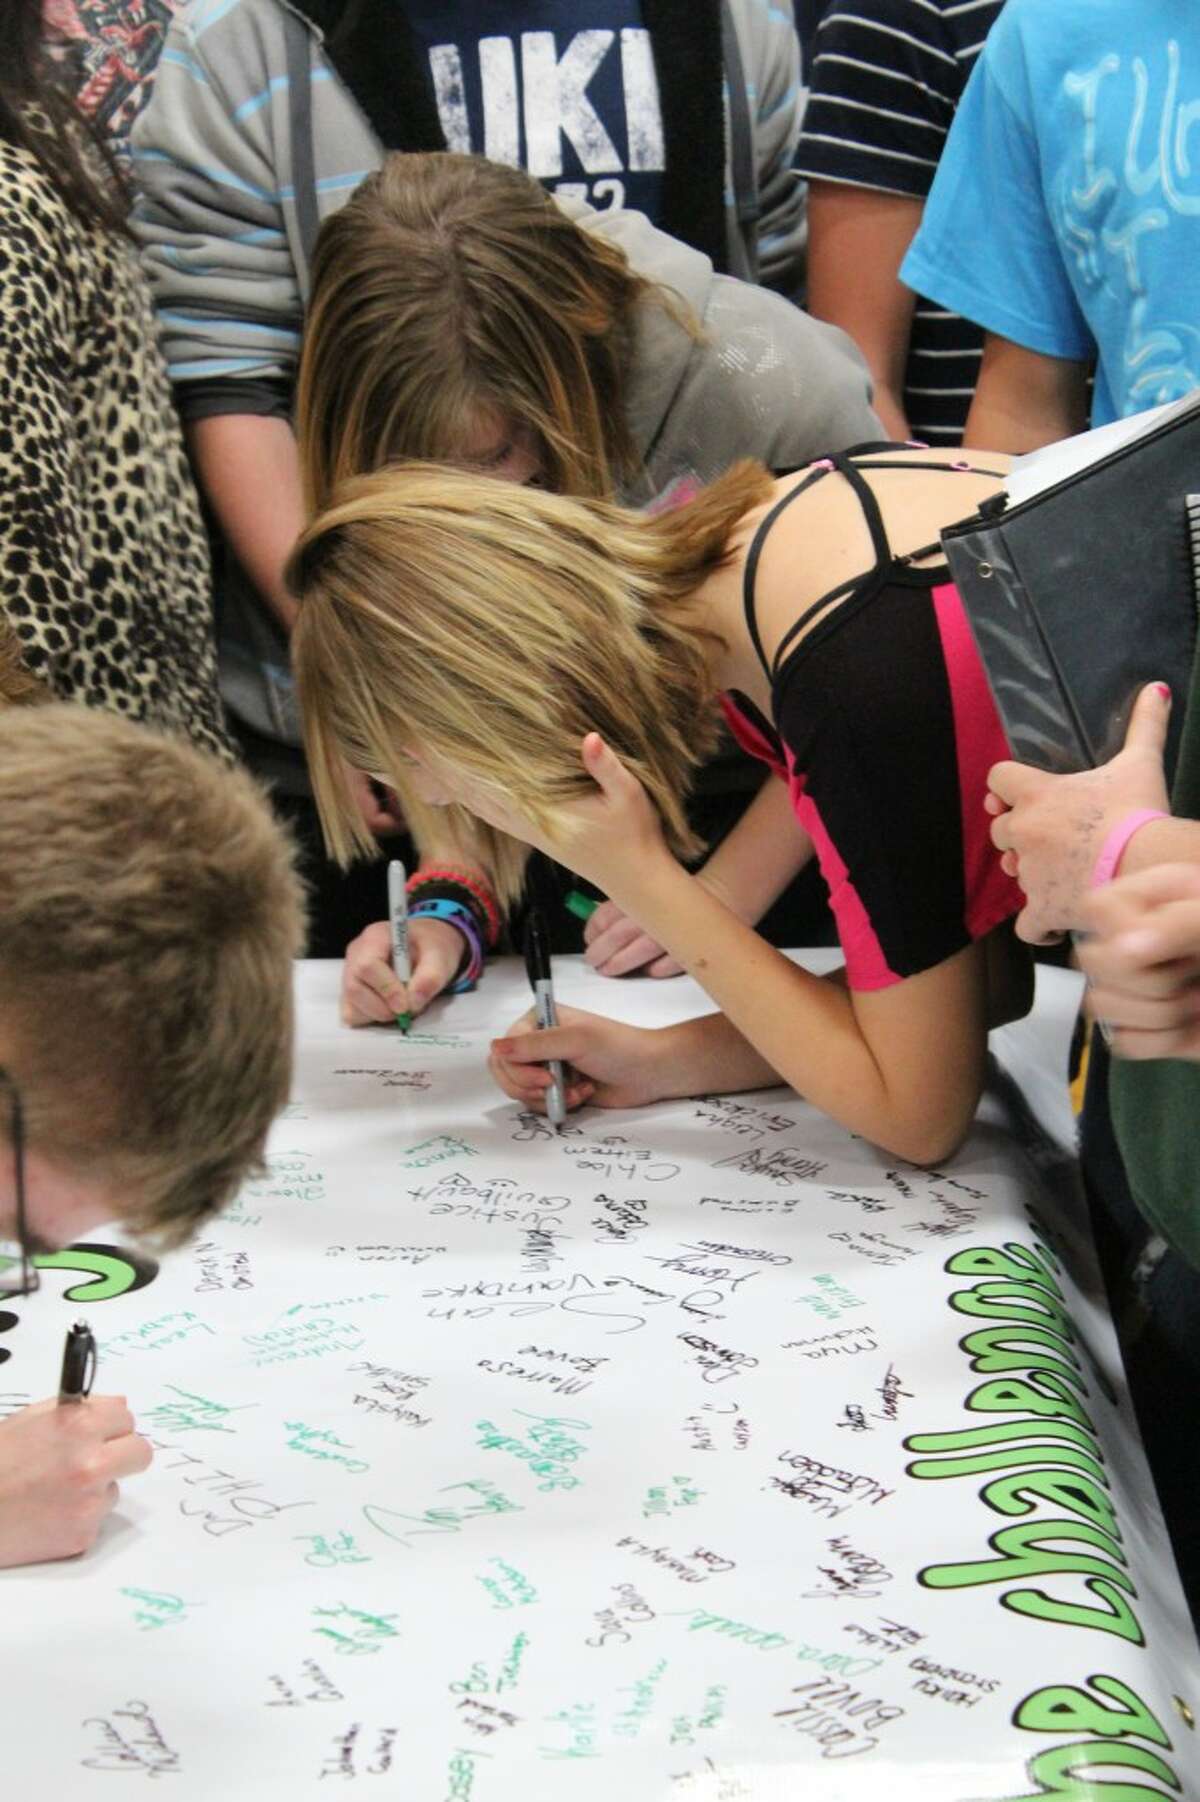 TAKING THE CHALLENGE: Pine River High School Students sign a banner saying they will take the Kids Driving Responsibly challenge in honor of Kelsey Dawn Raffele, who was killed in a car accident while talking on her cell phone.